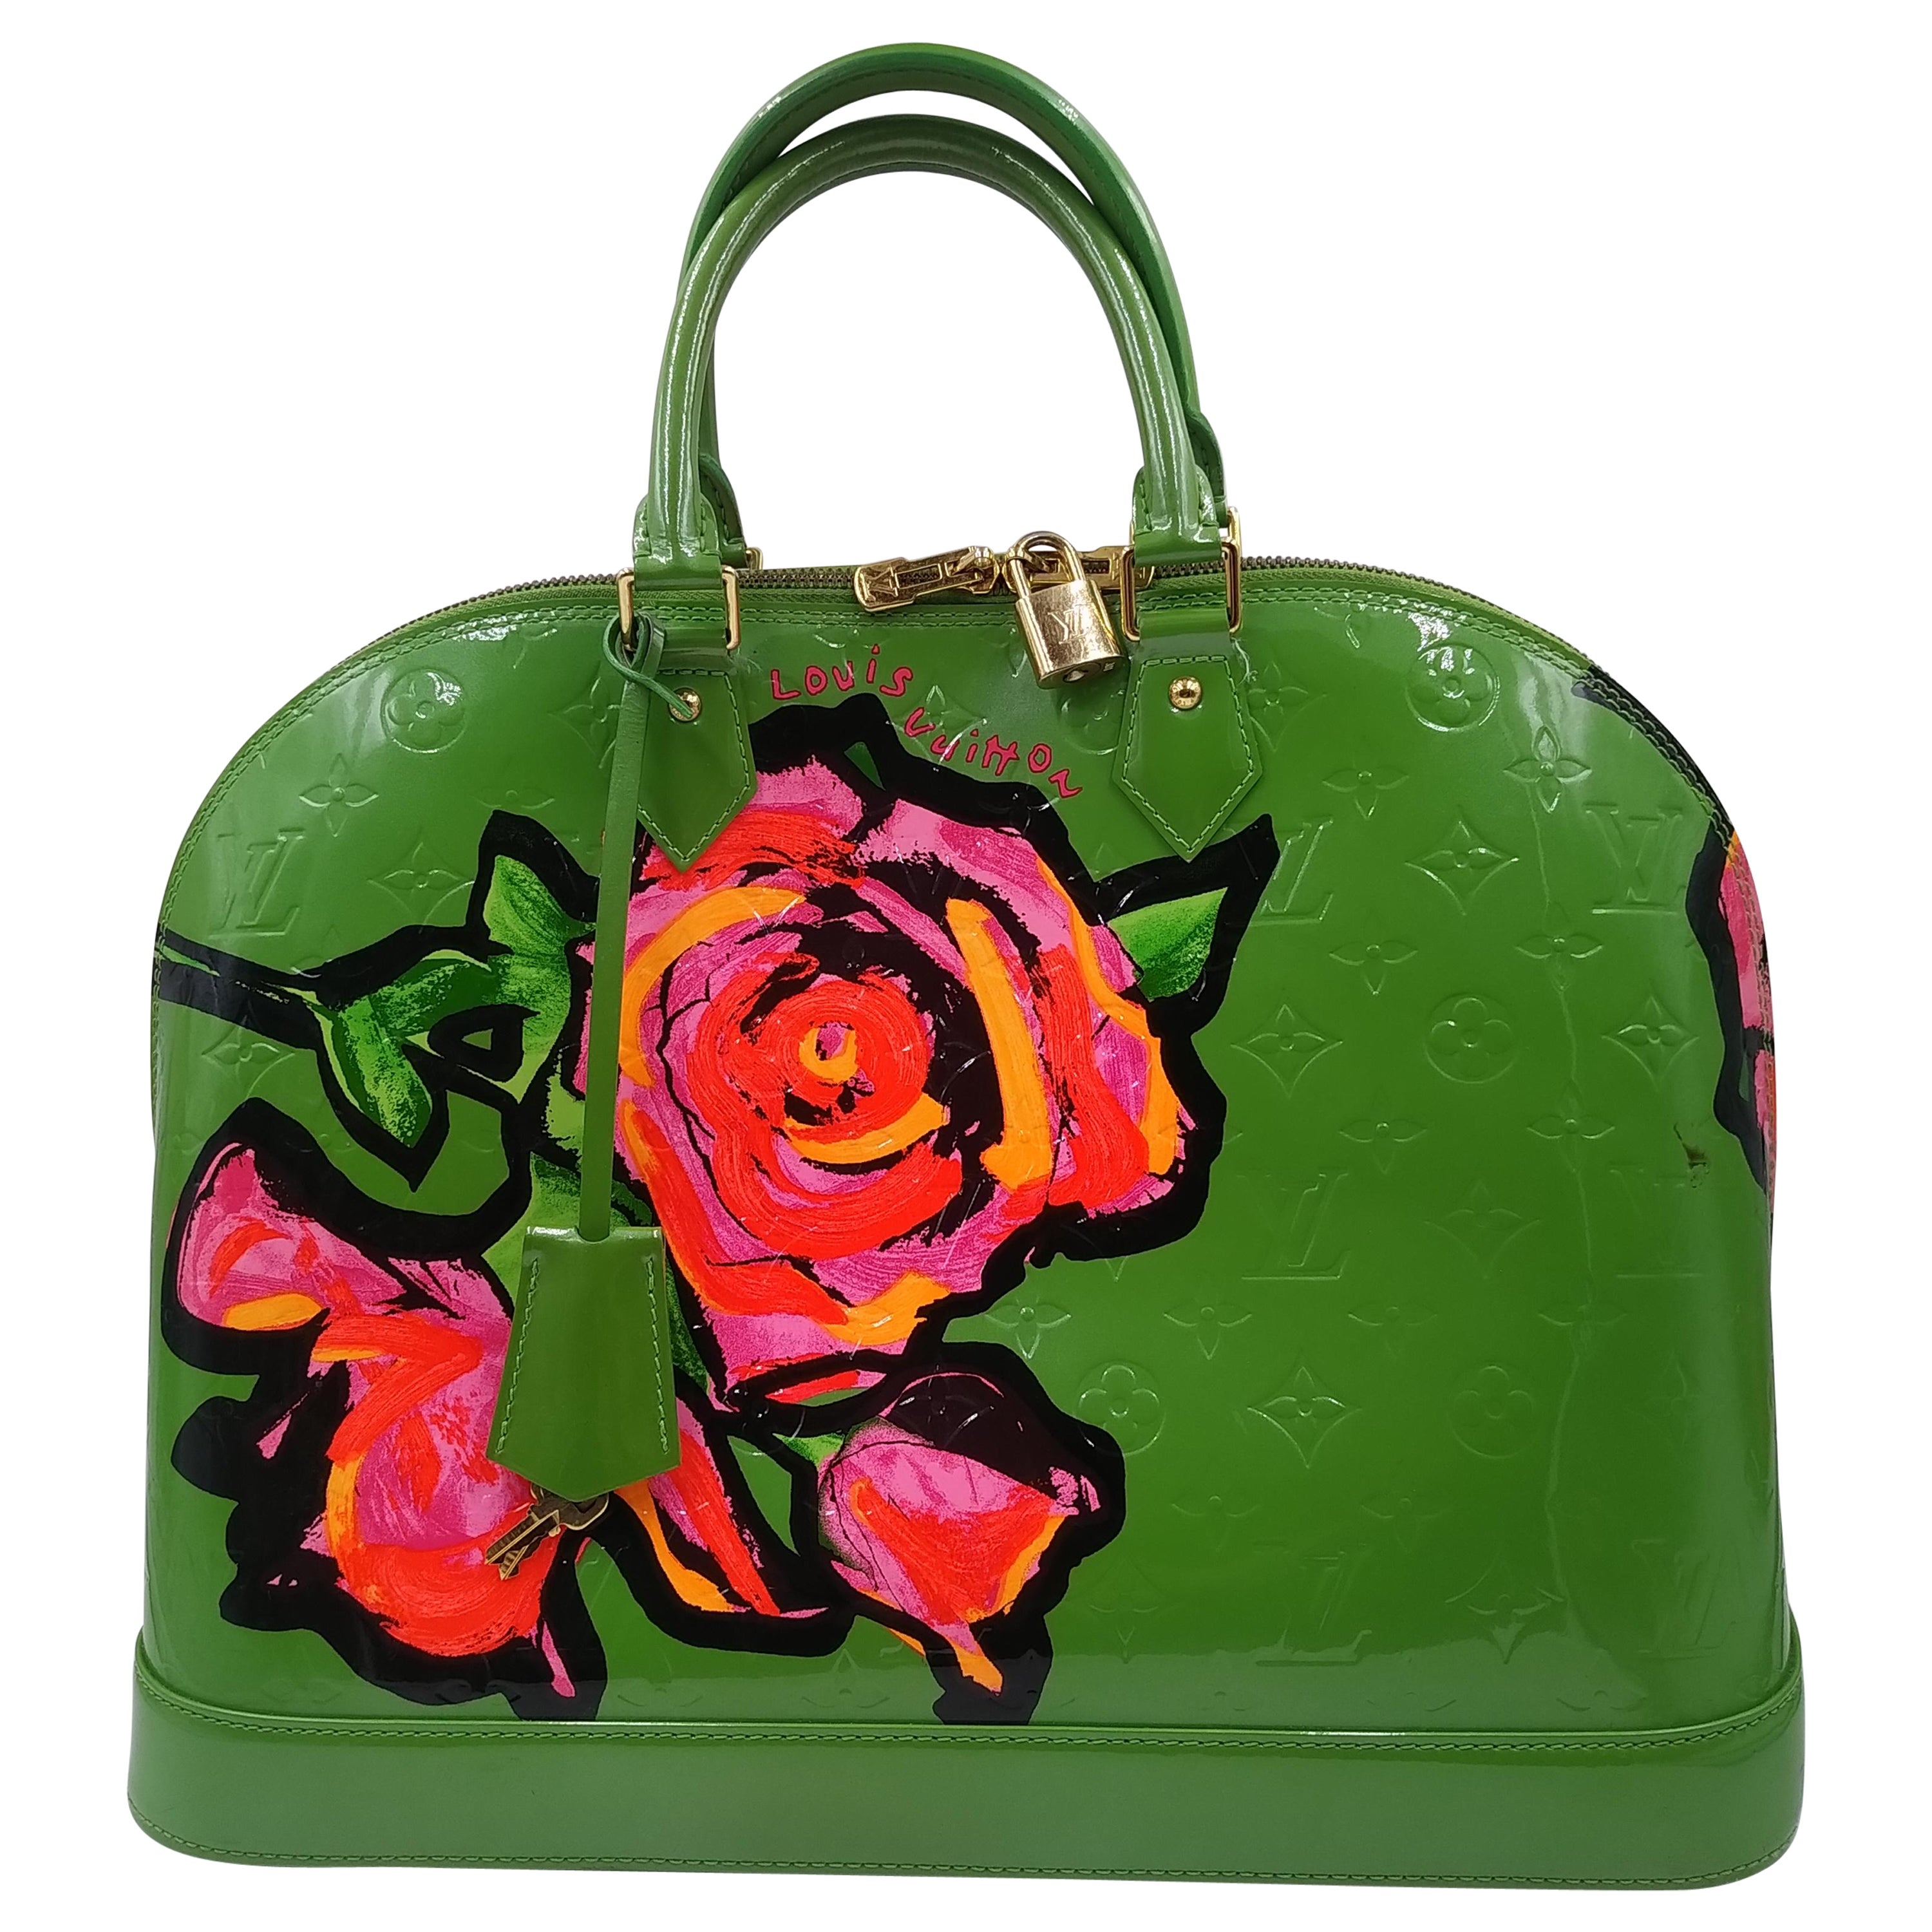 Louis Vuitton x Stephen Sprouse Monogram Vernis Roses Collection